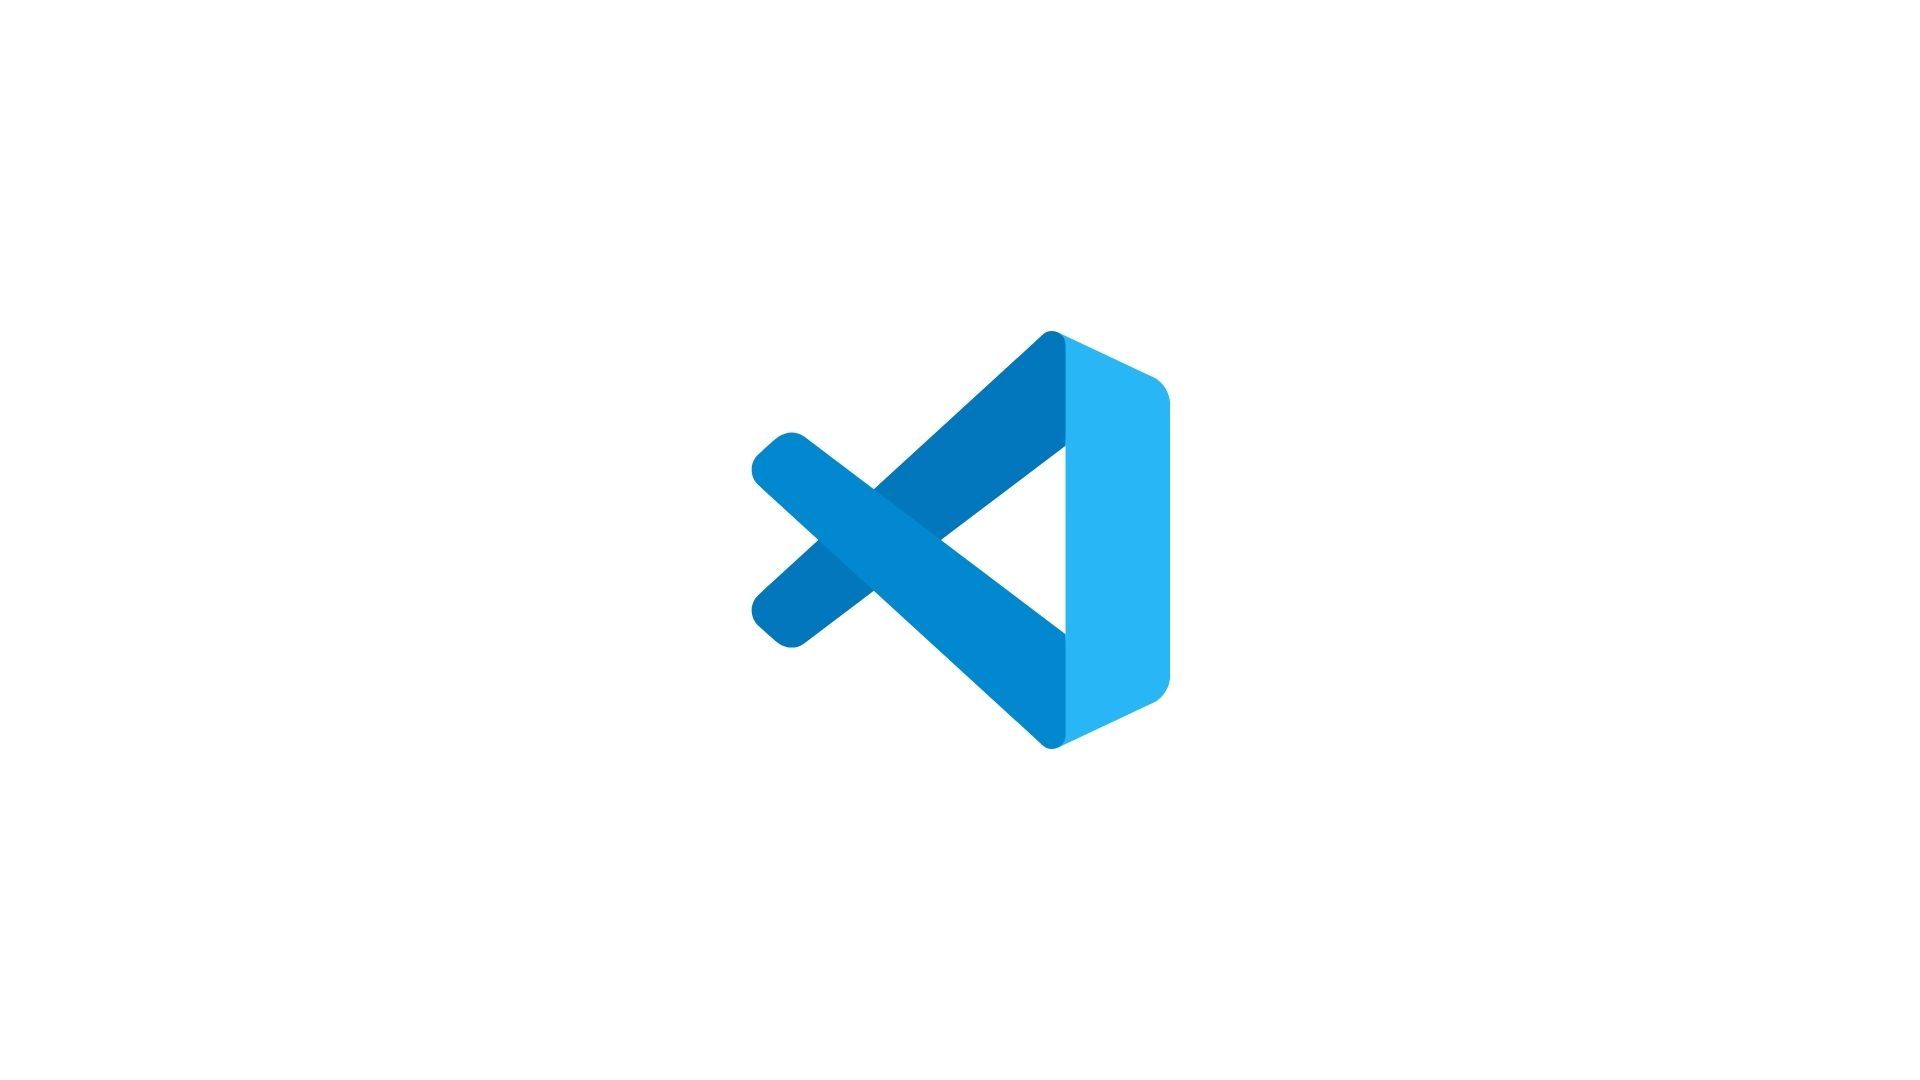 How to bring up the terminal in Visual Studio Code